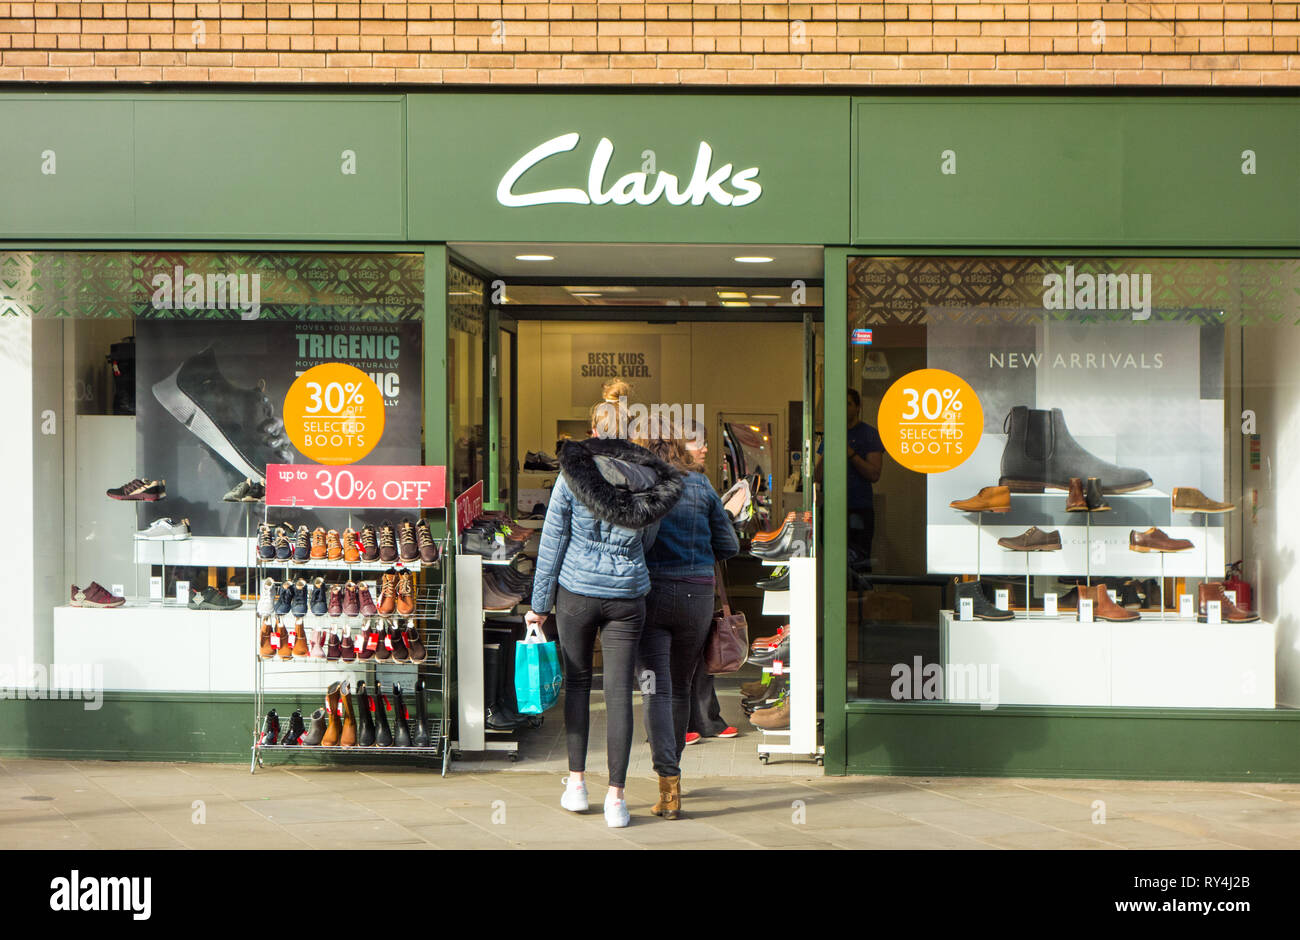 clarks shoes meadowhall